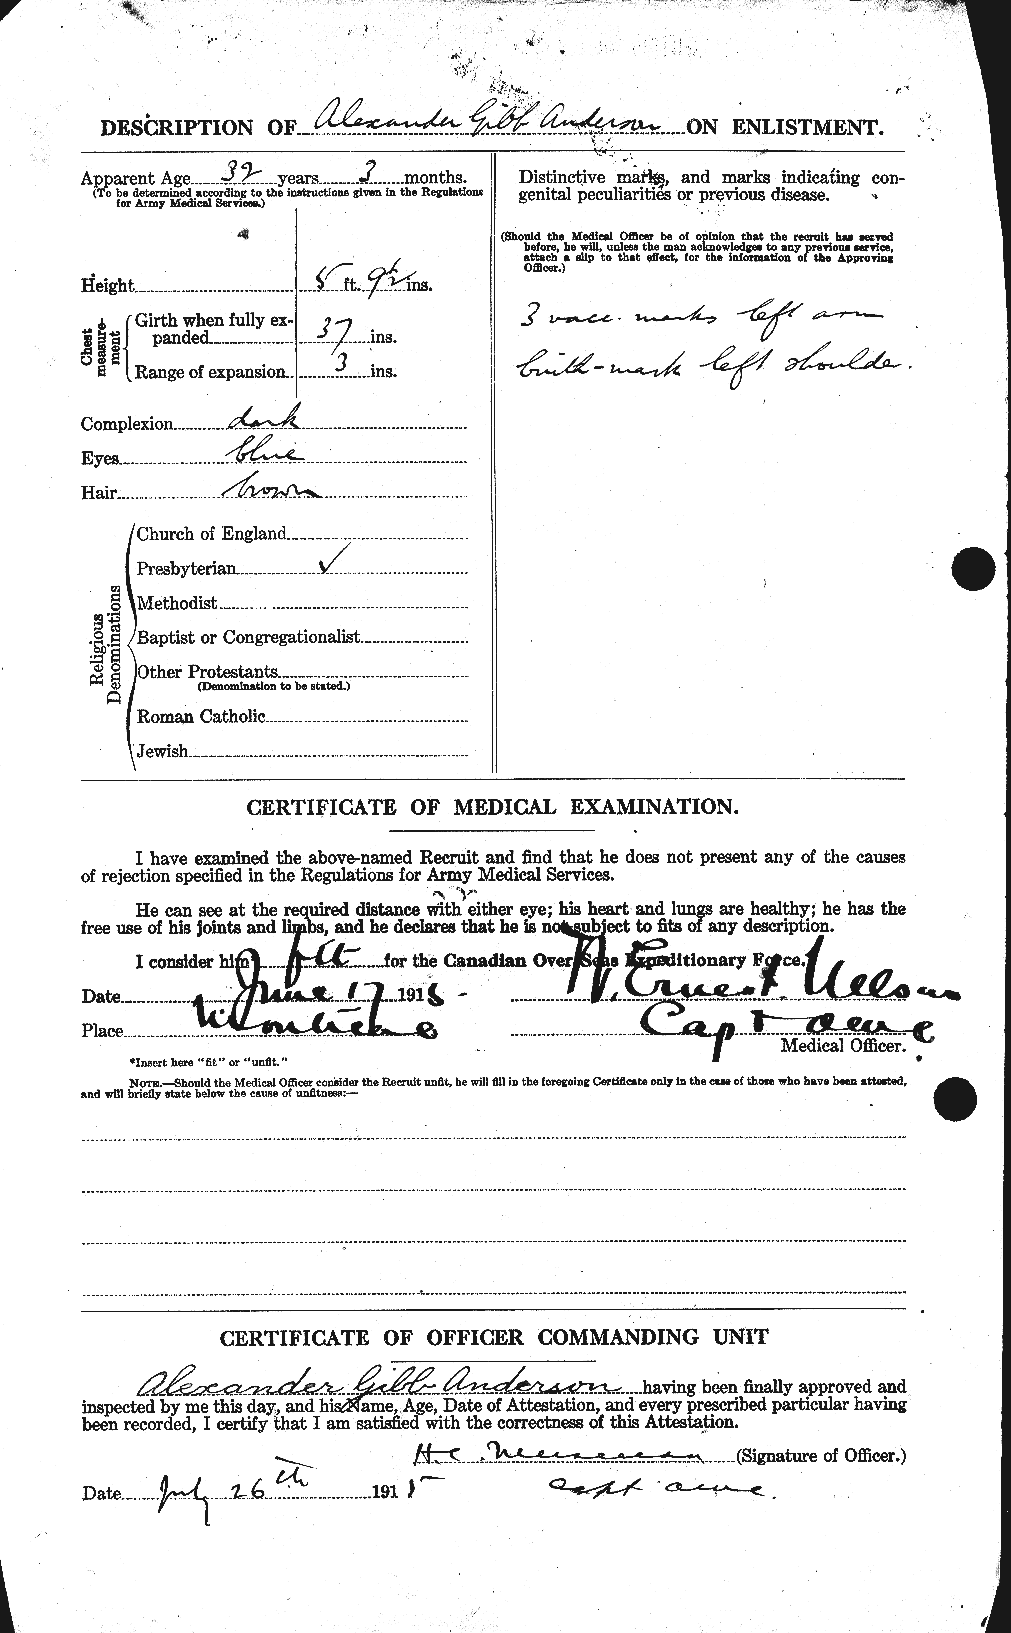 Personnel Records of the First World War - CEF 209490b